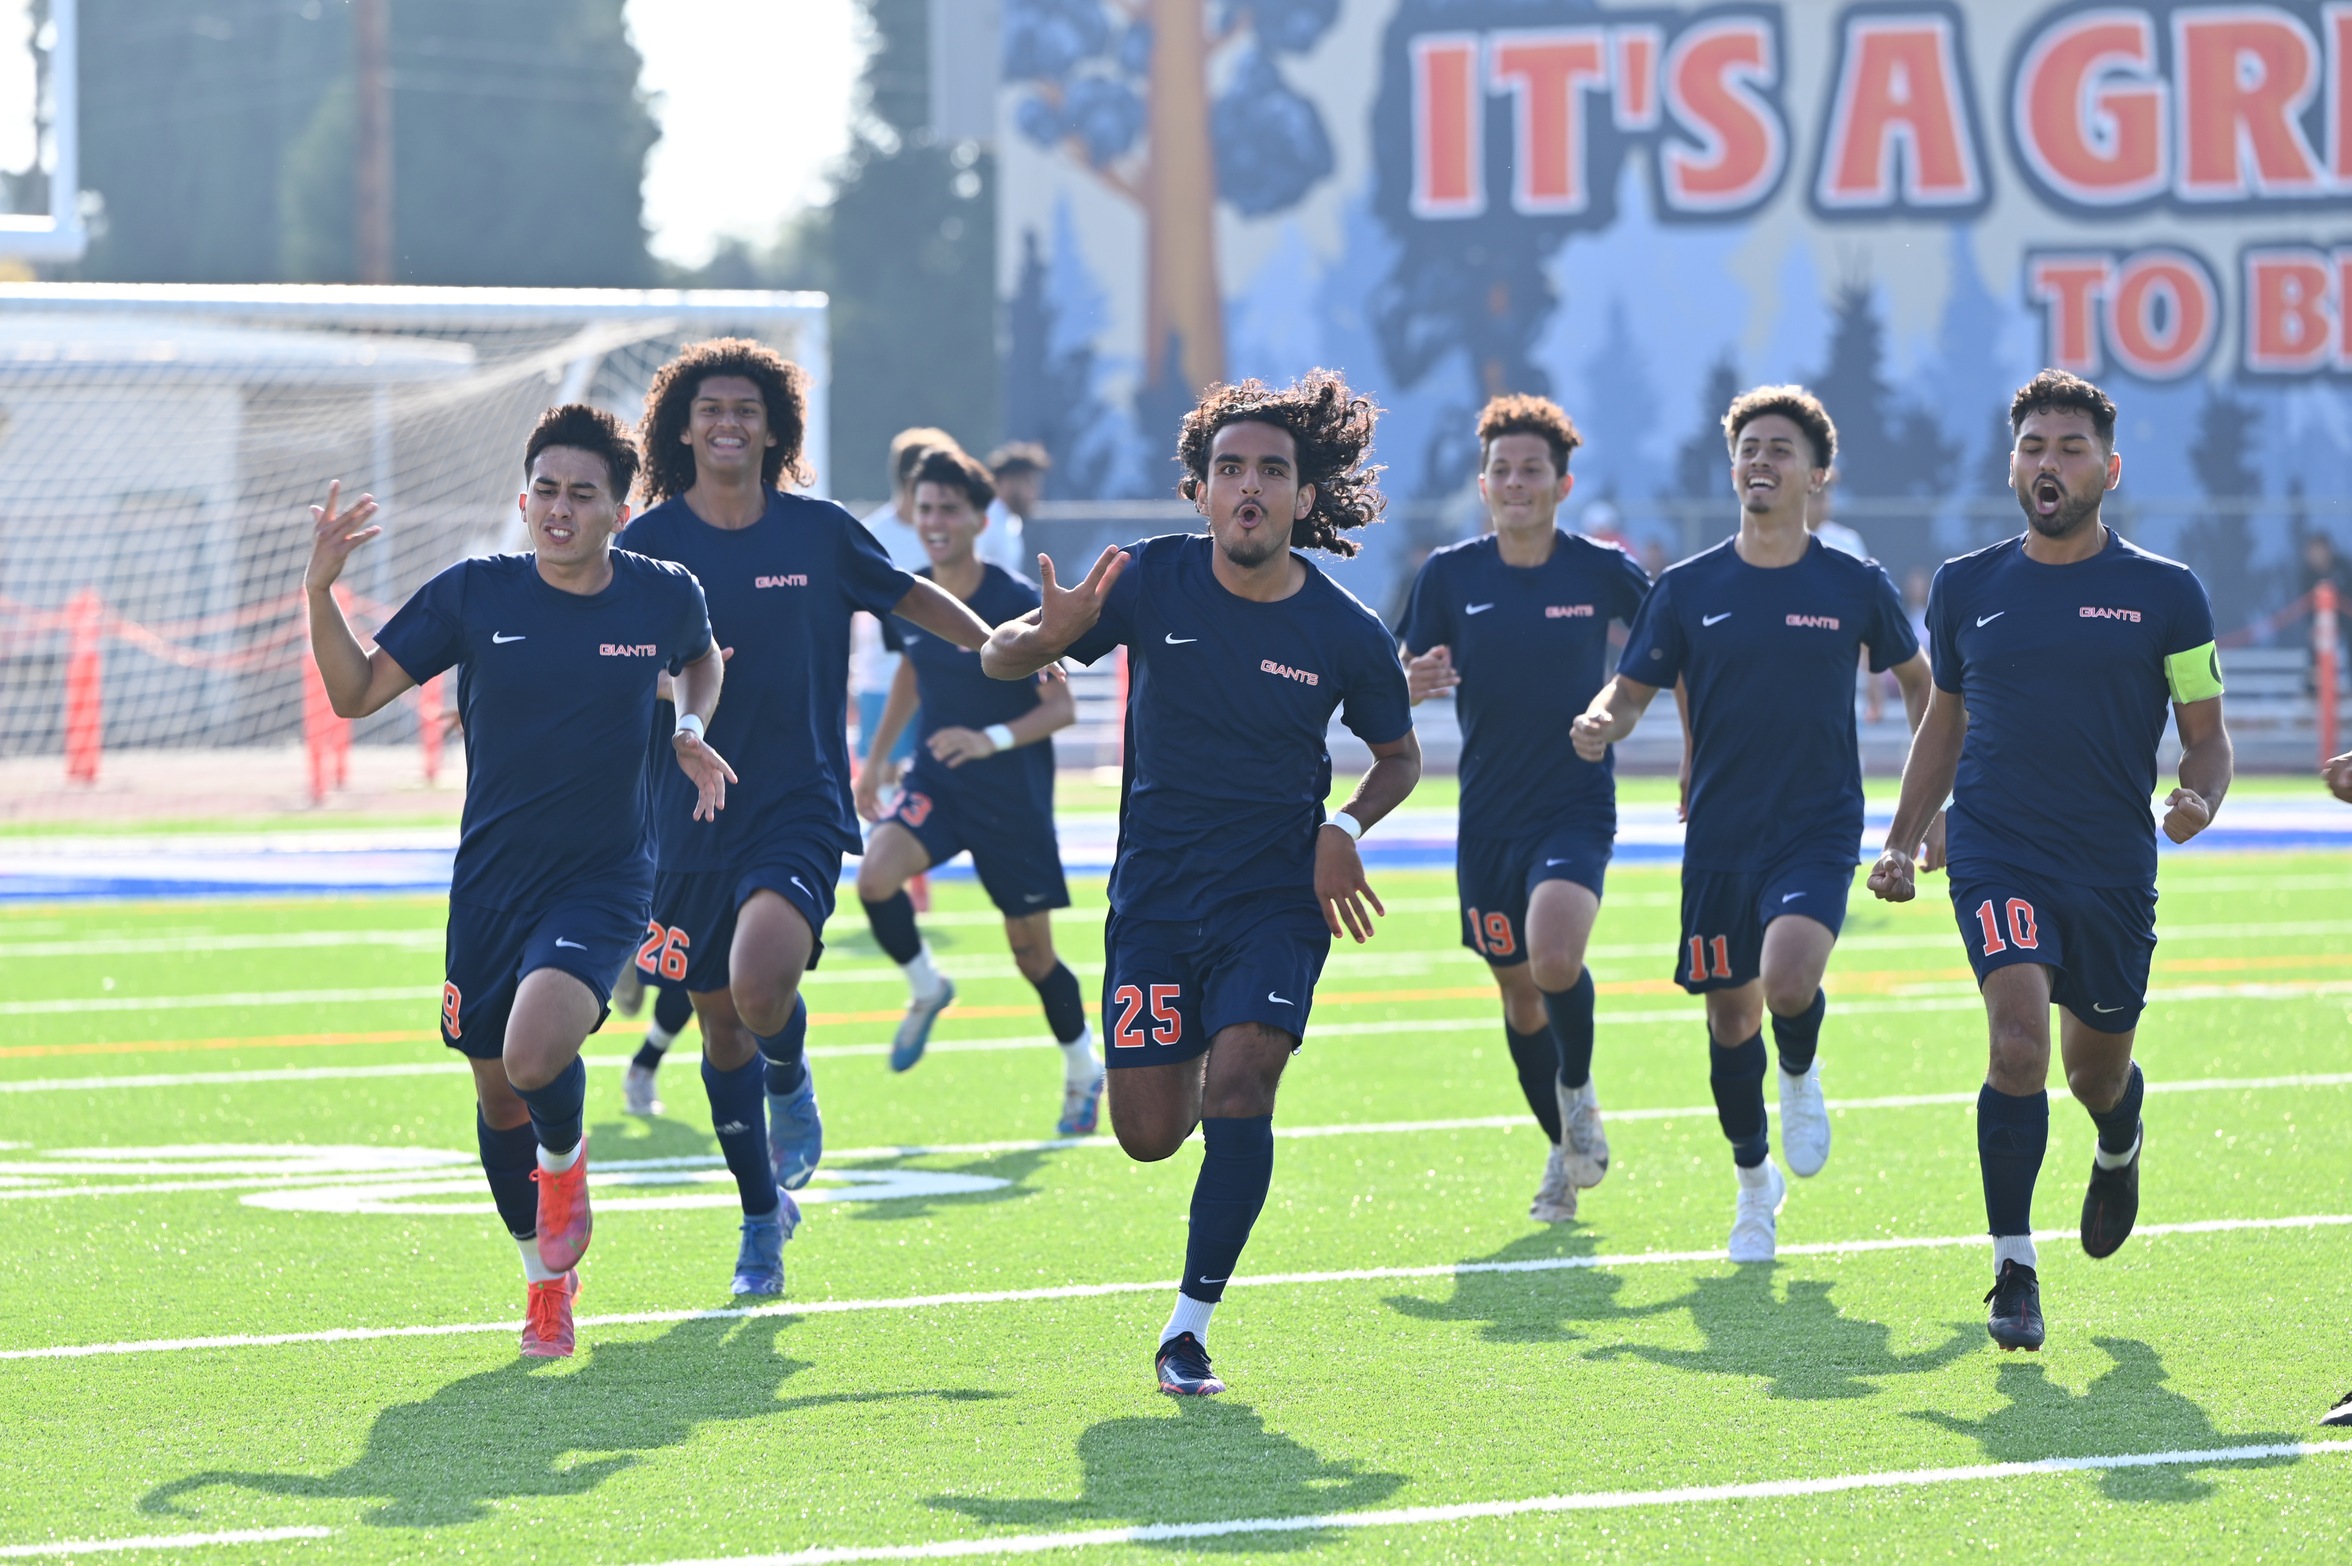 Men's soccer advances to 2nd round of NorCal Regionals